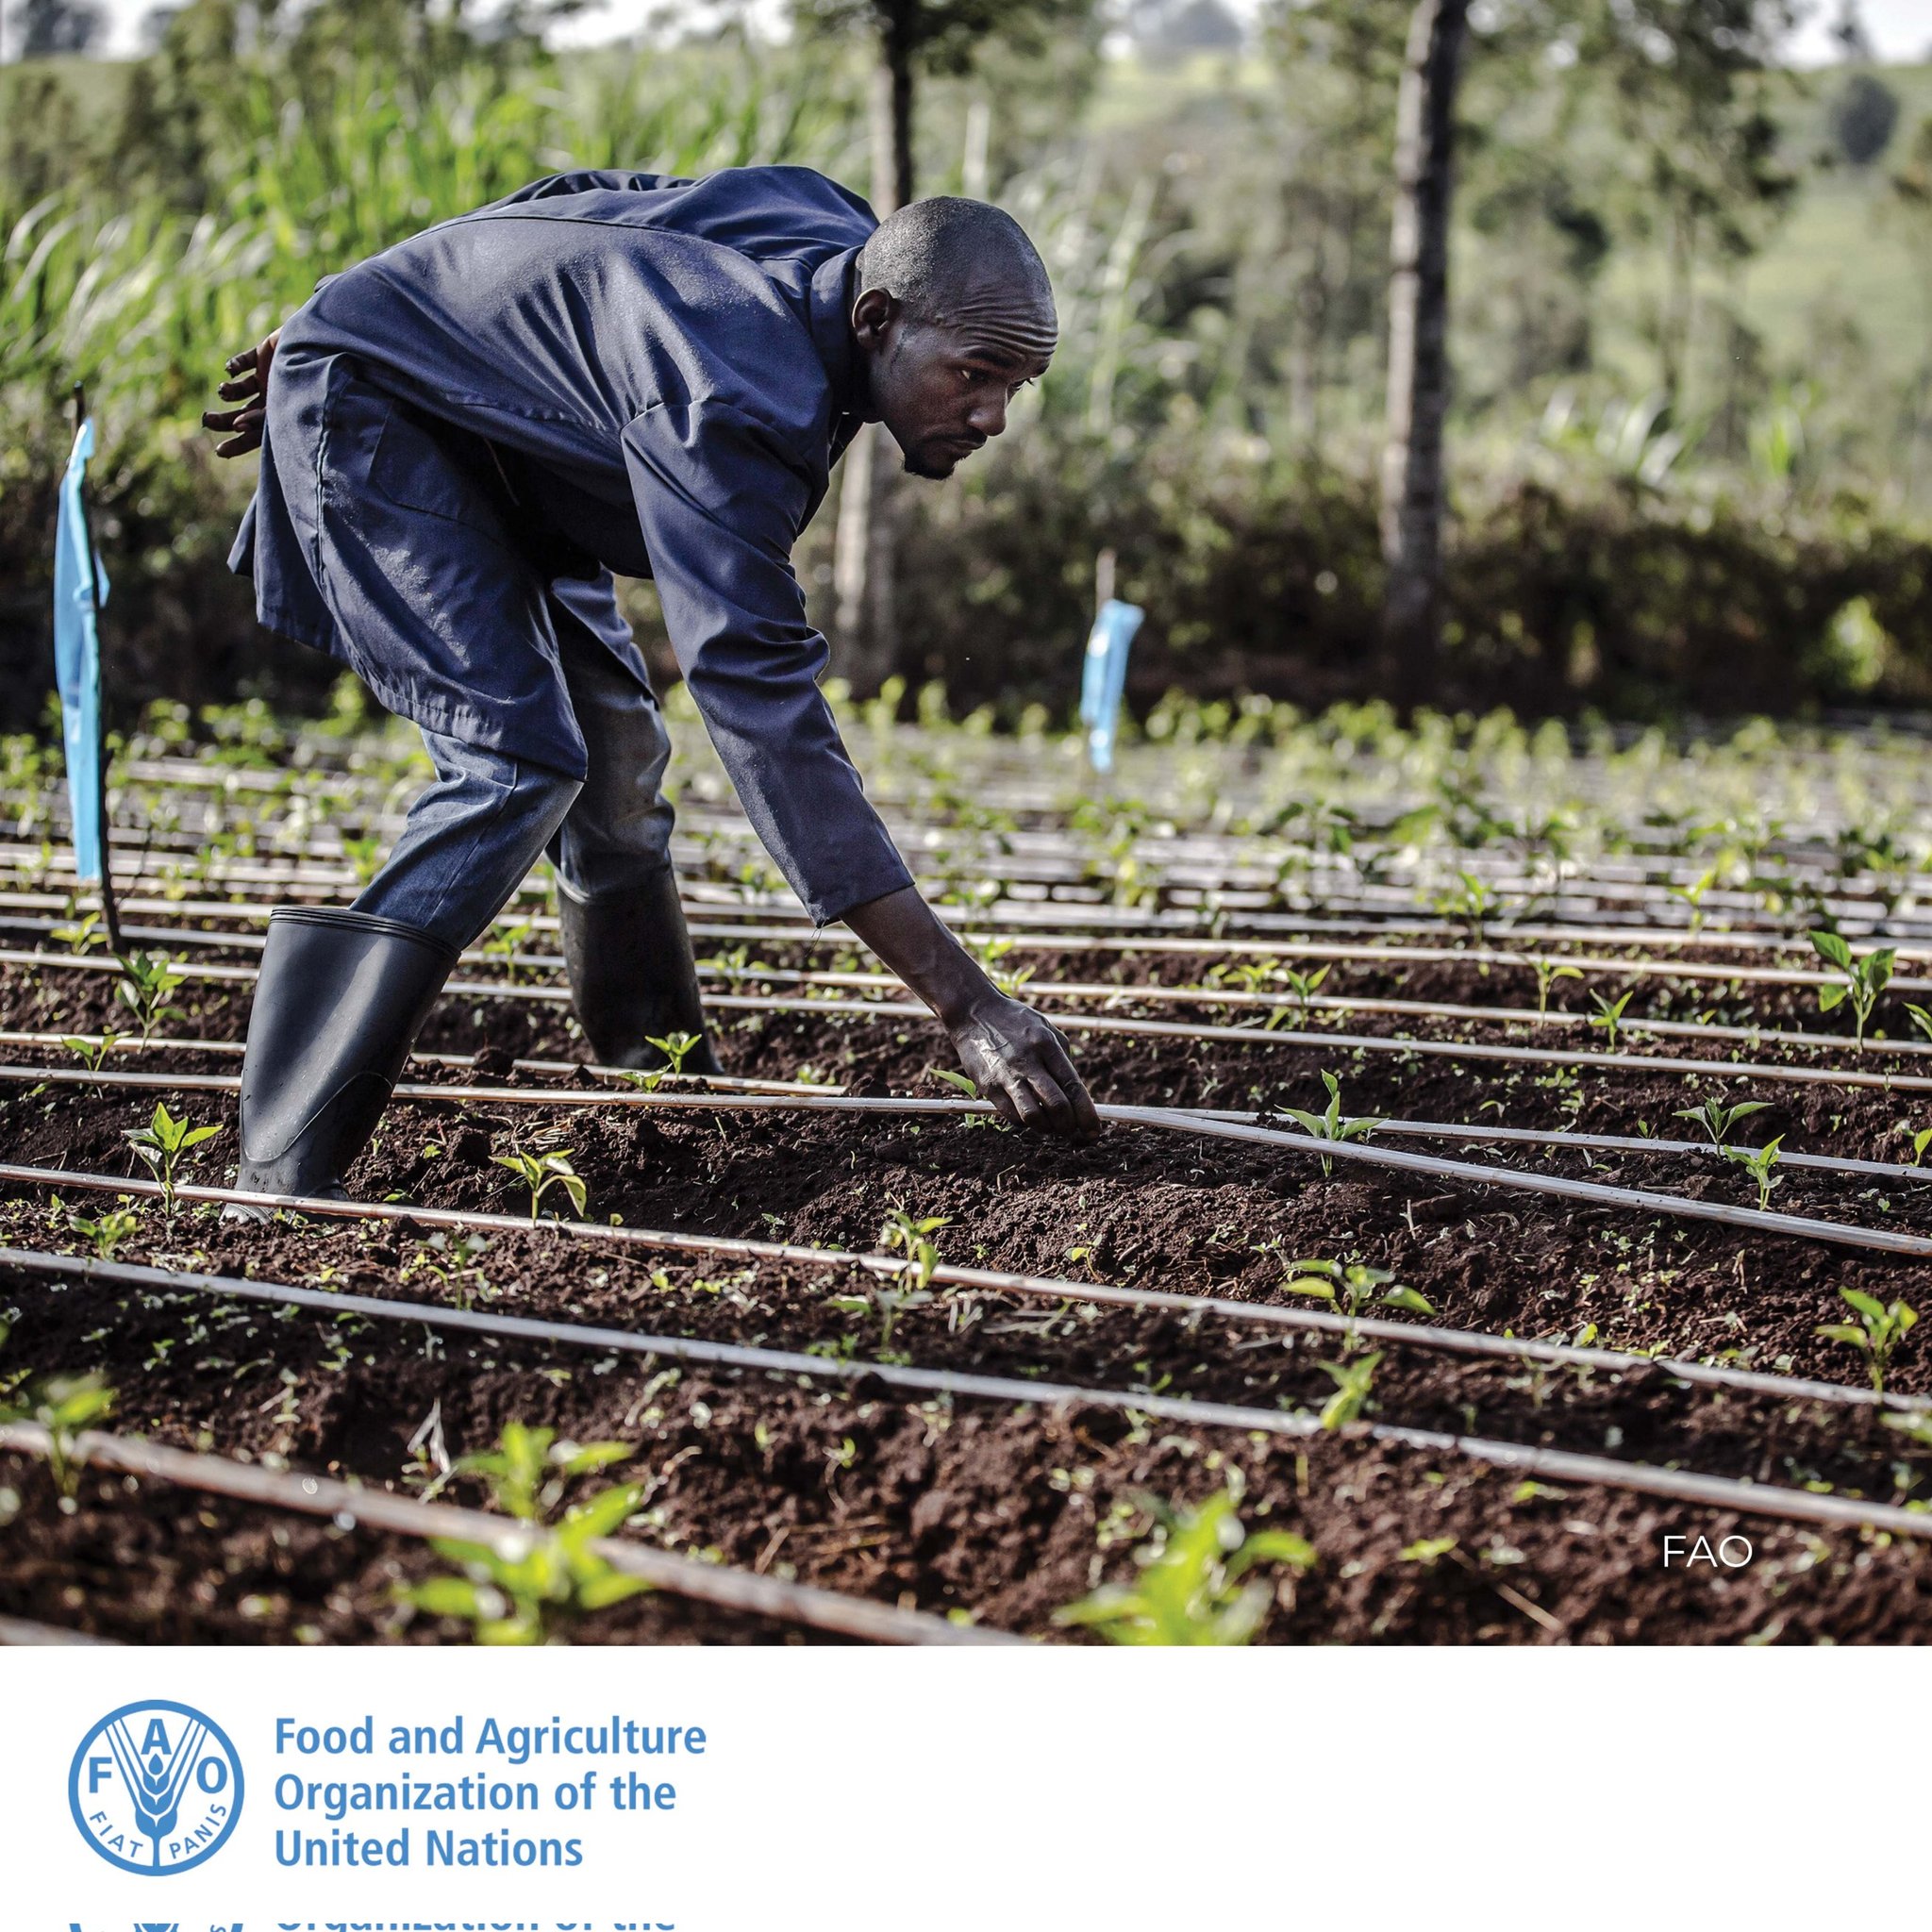 Africa has potential to achieve food security and sustainable development